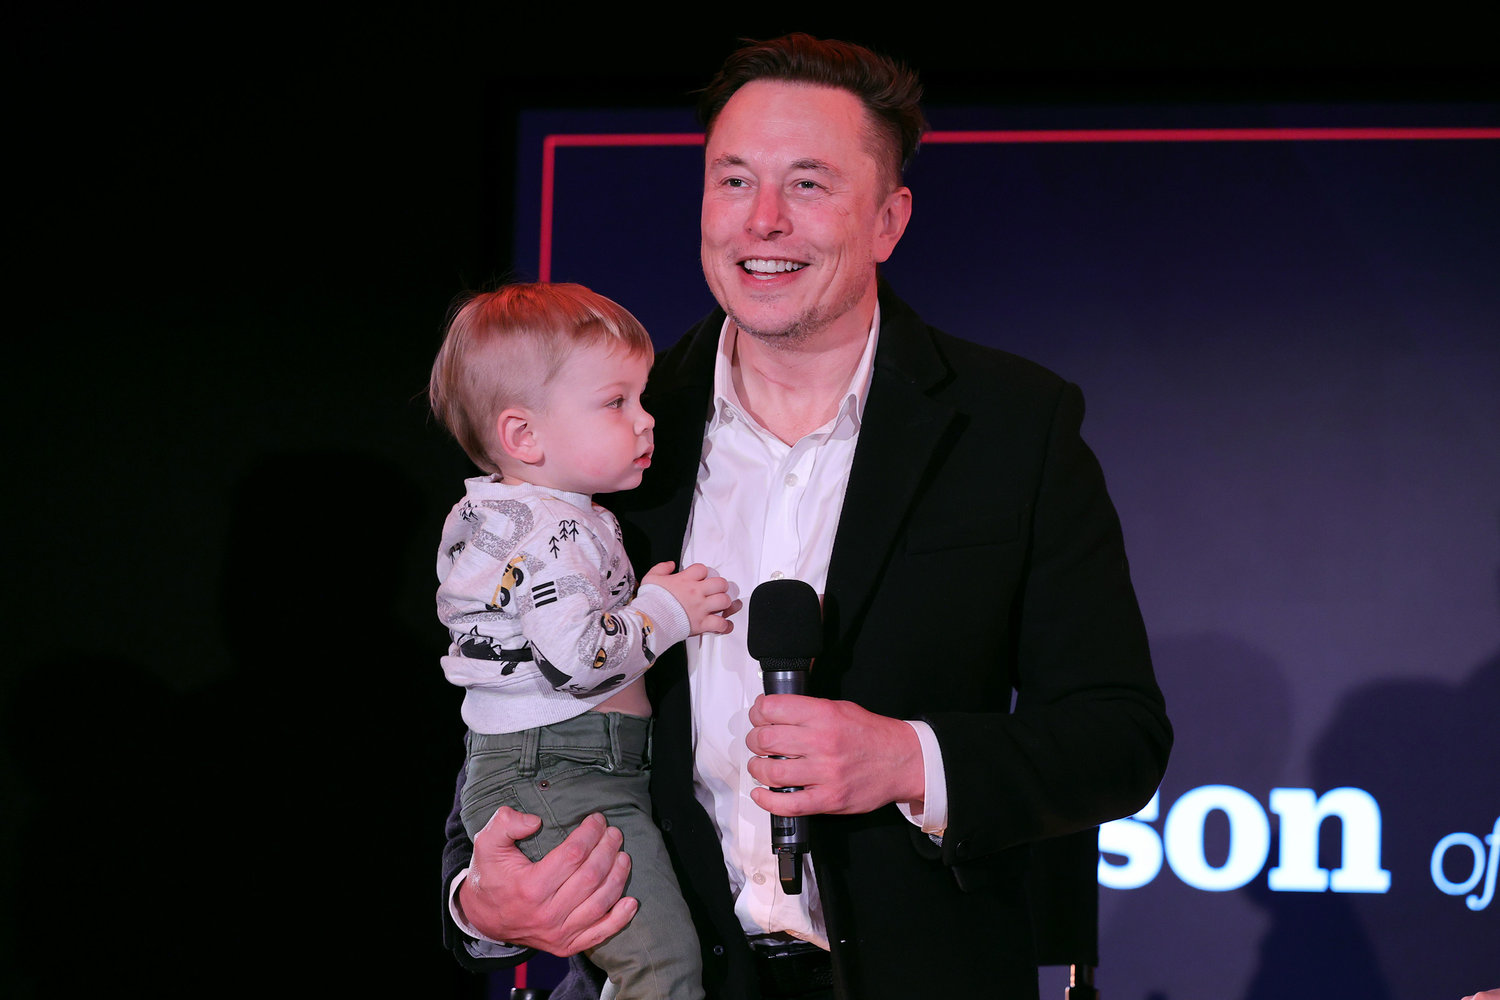 Elon Musk and son X Æ A-12 on stage for the  TIME Person of the Year on Dec. 13, 2021 in New York City. (Theo Wargo/Getty Images for TIME/TNS)